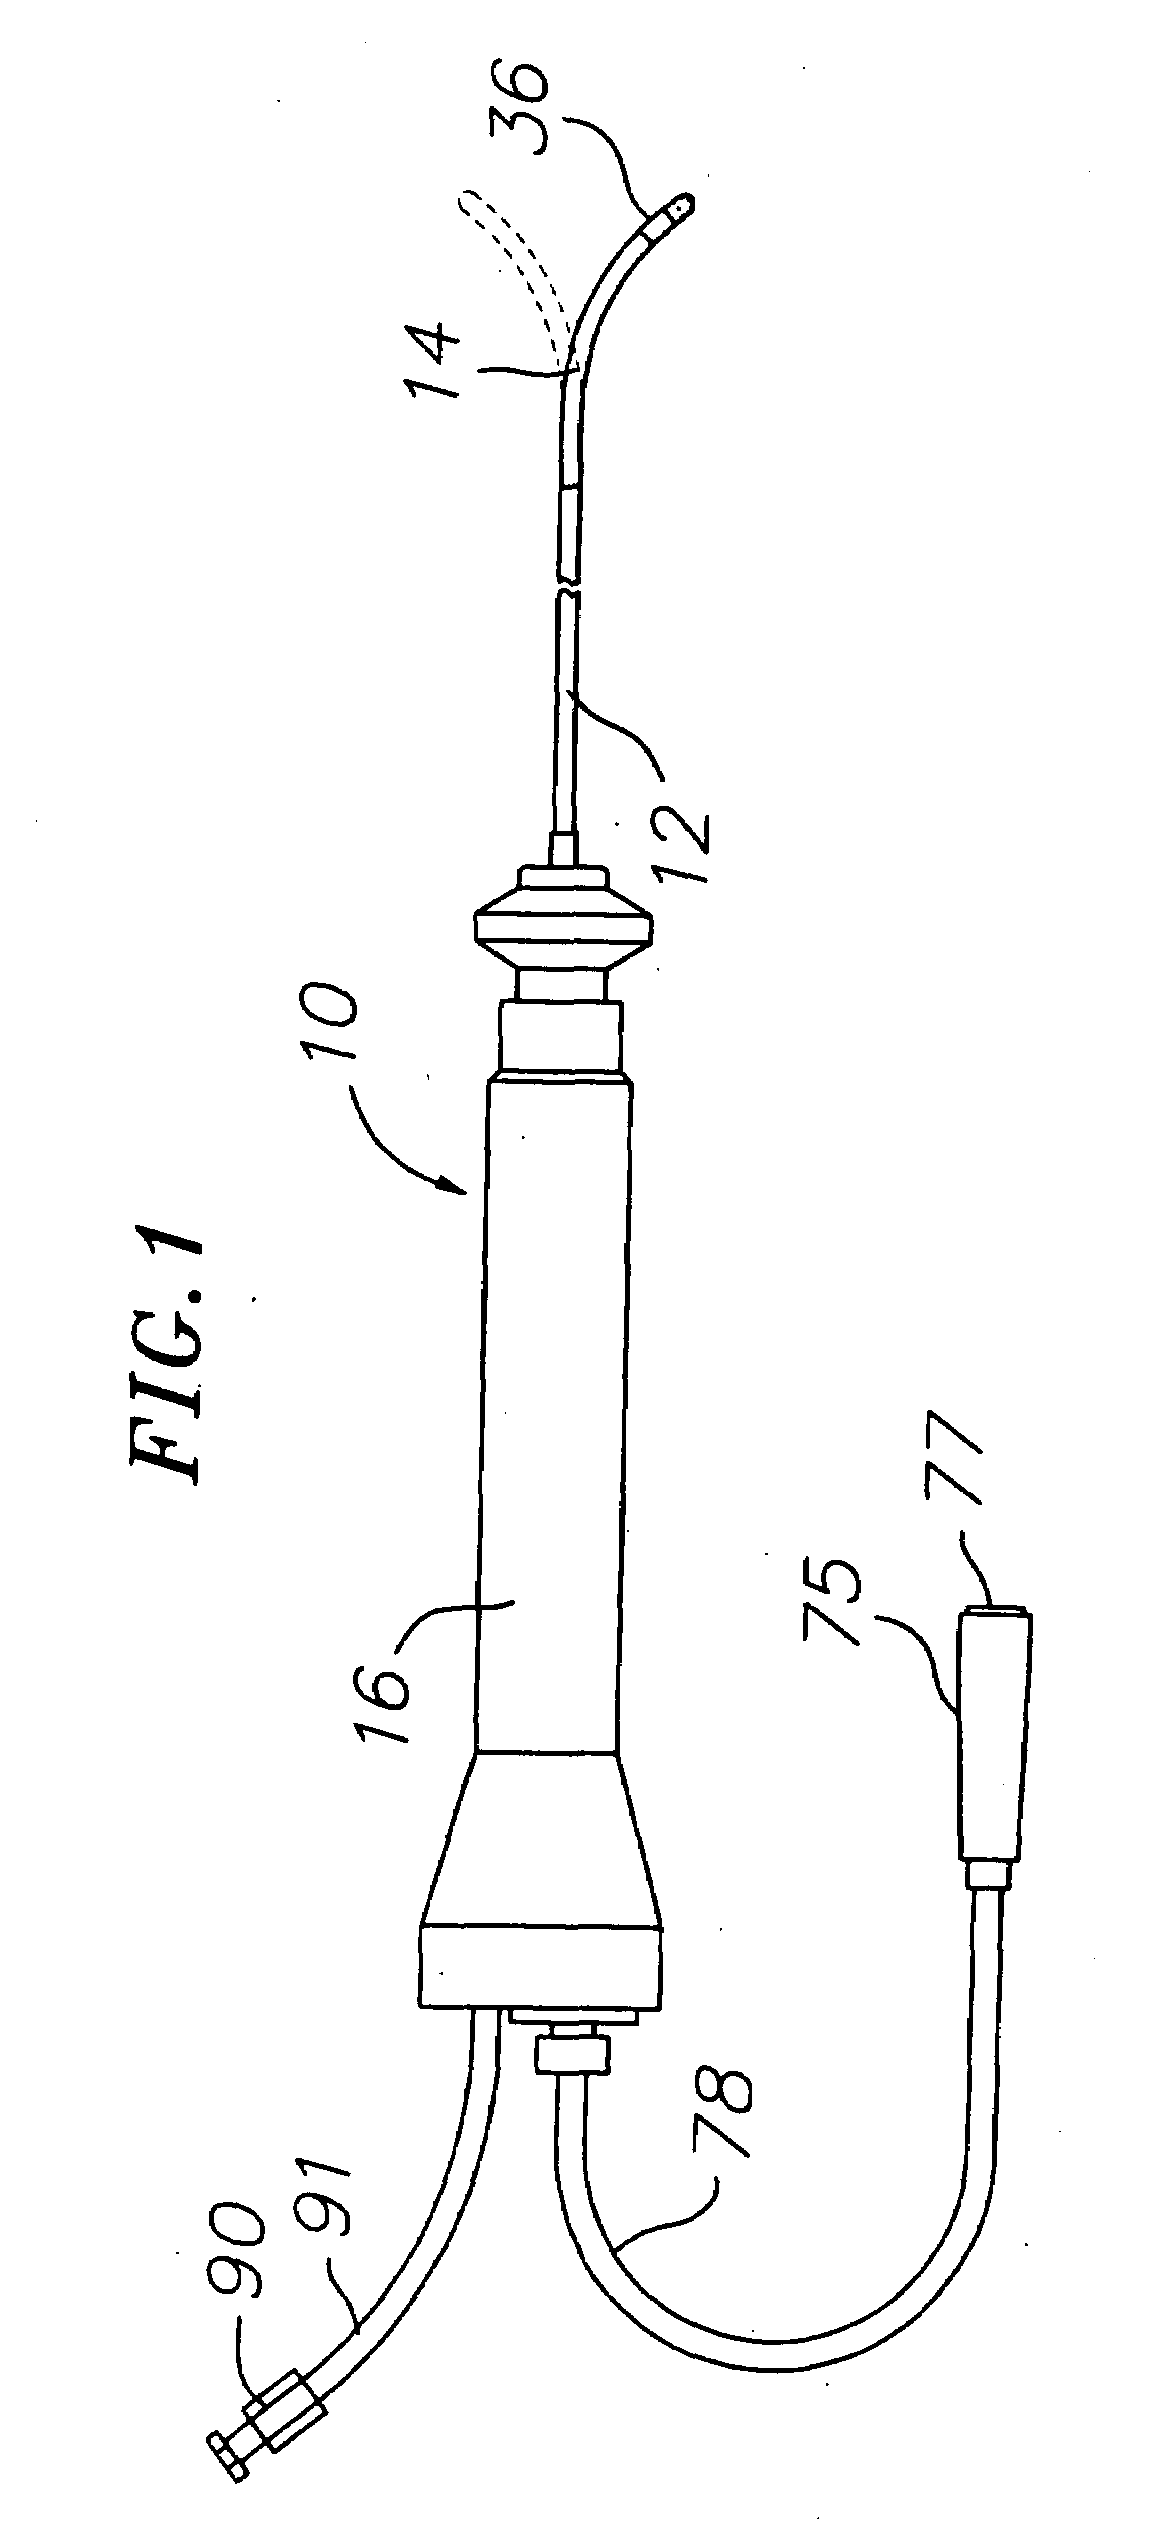 Ablation catheter with optically transparent, electrically conductive tip